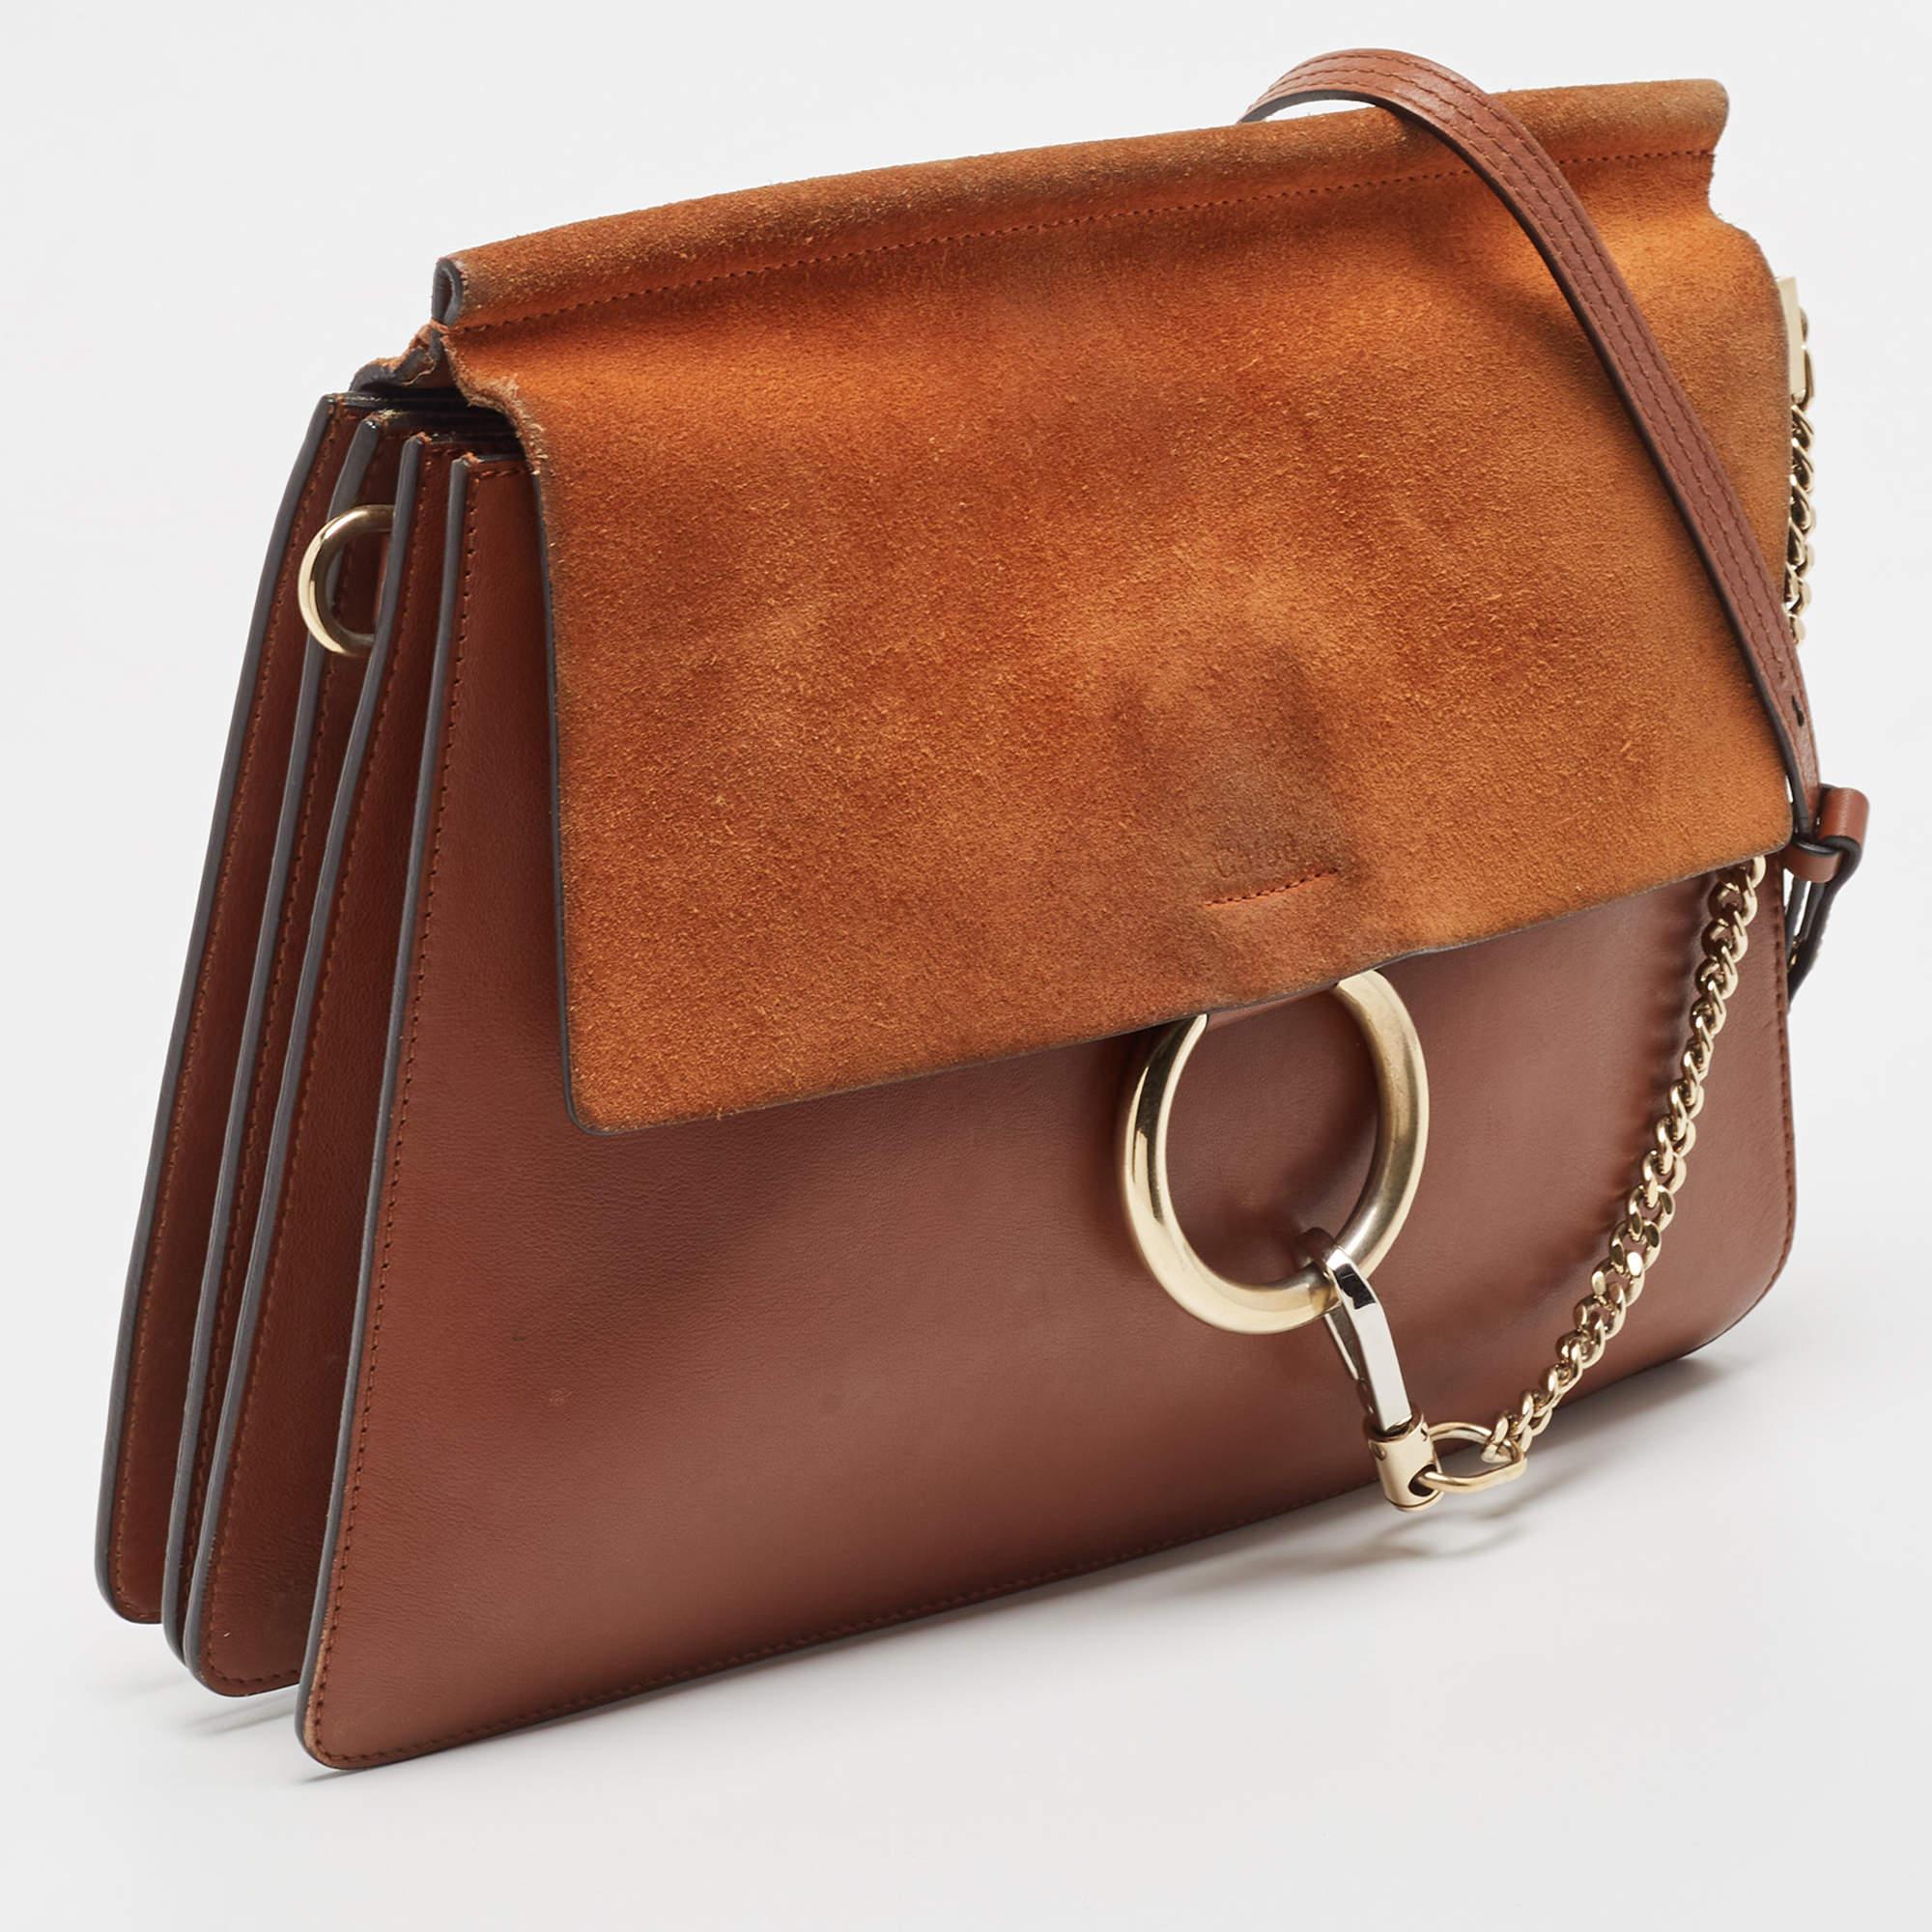 Chloe Brown Leather and Suede Medium Faye Shoulder Bag For Sale 6